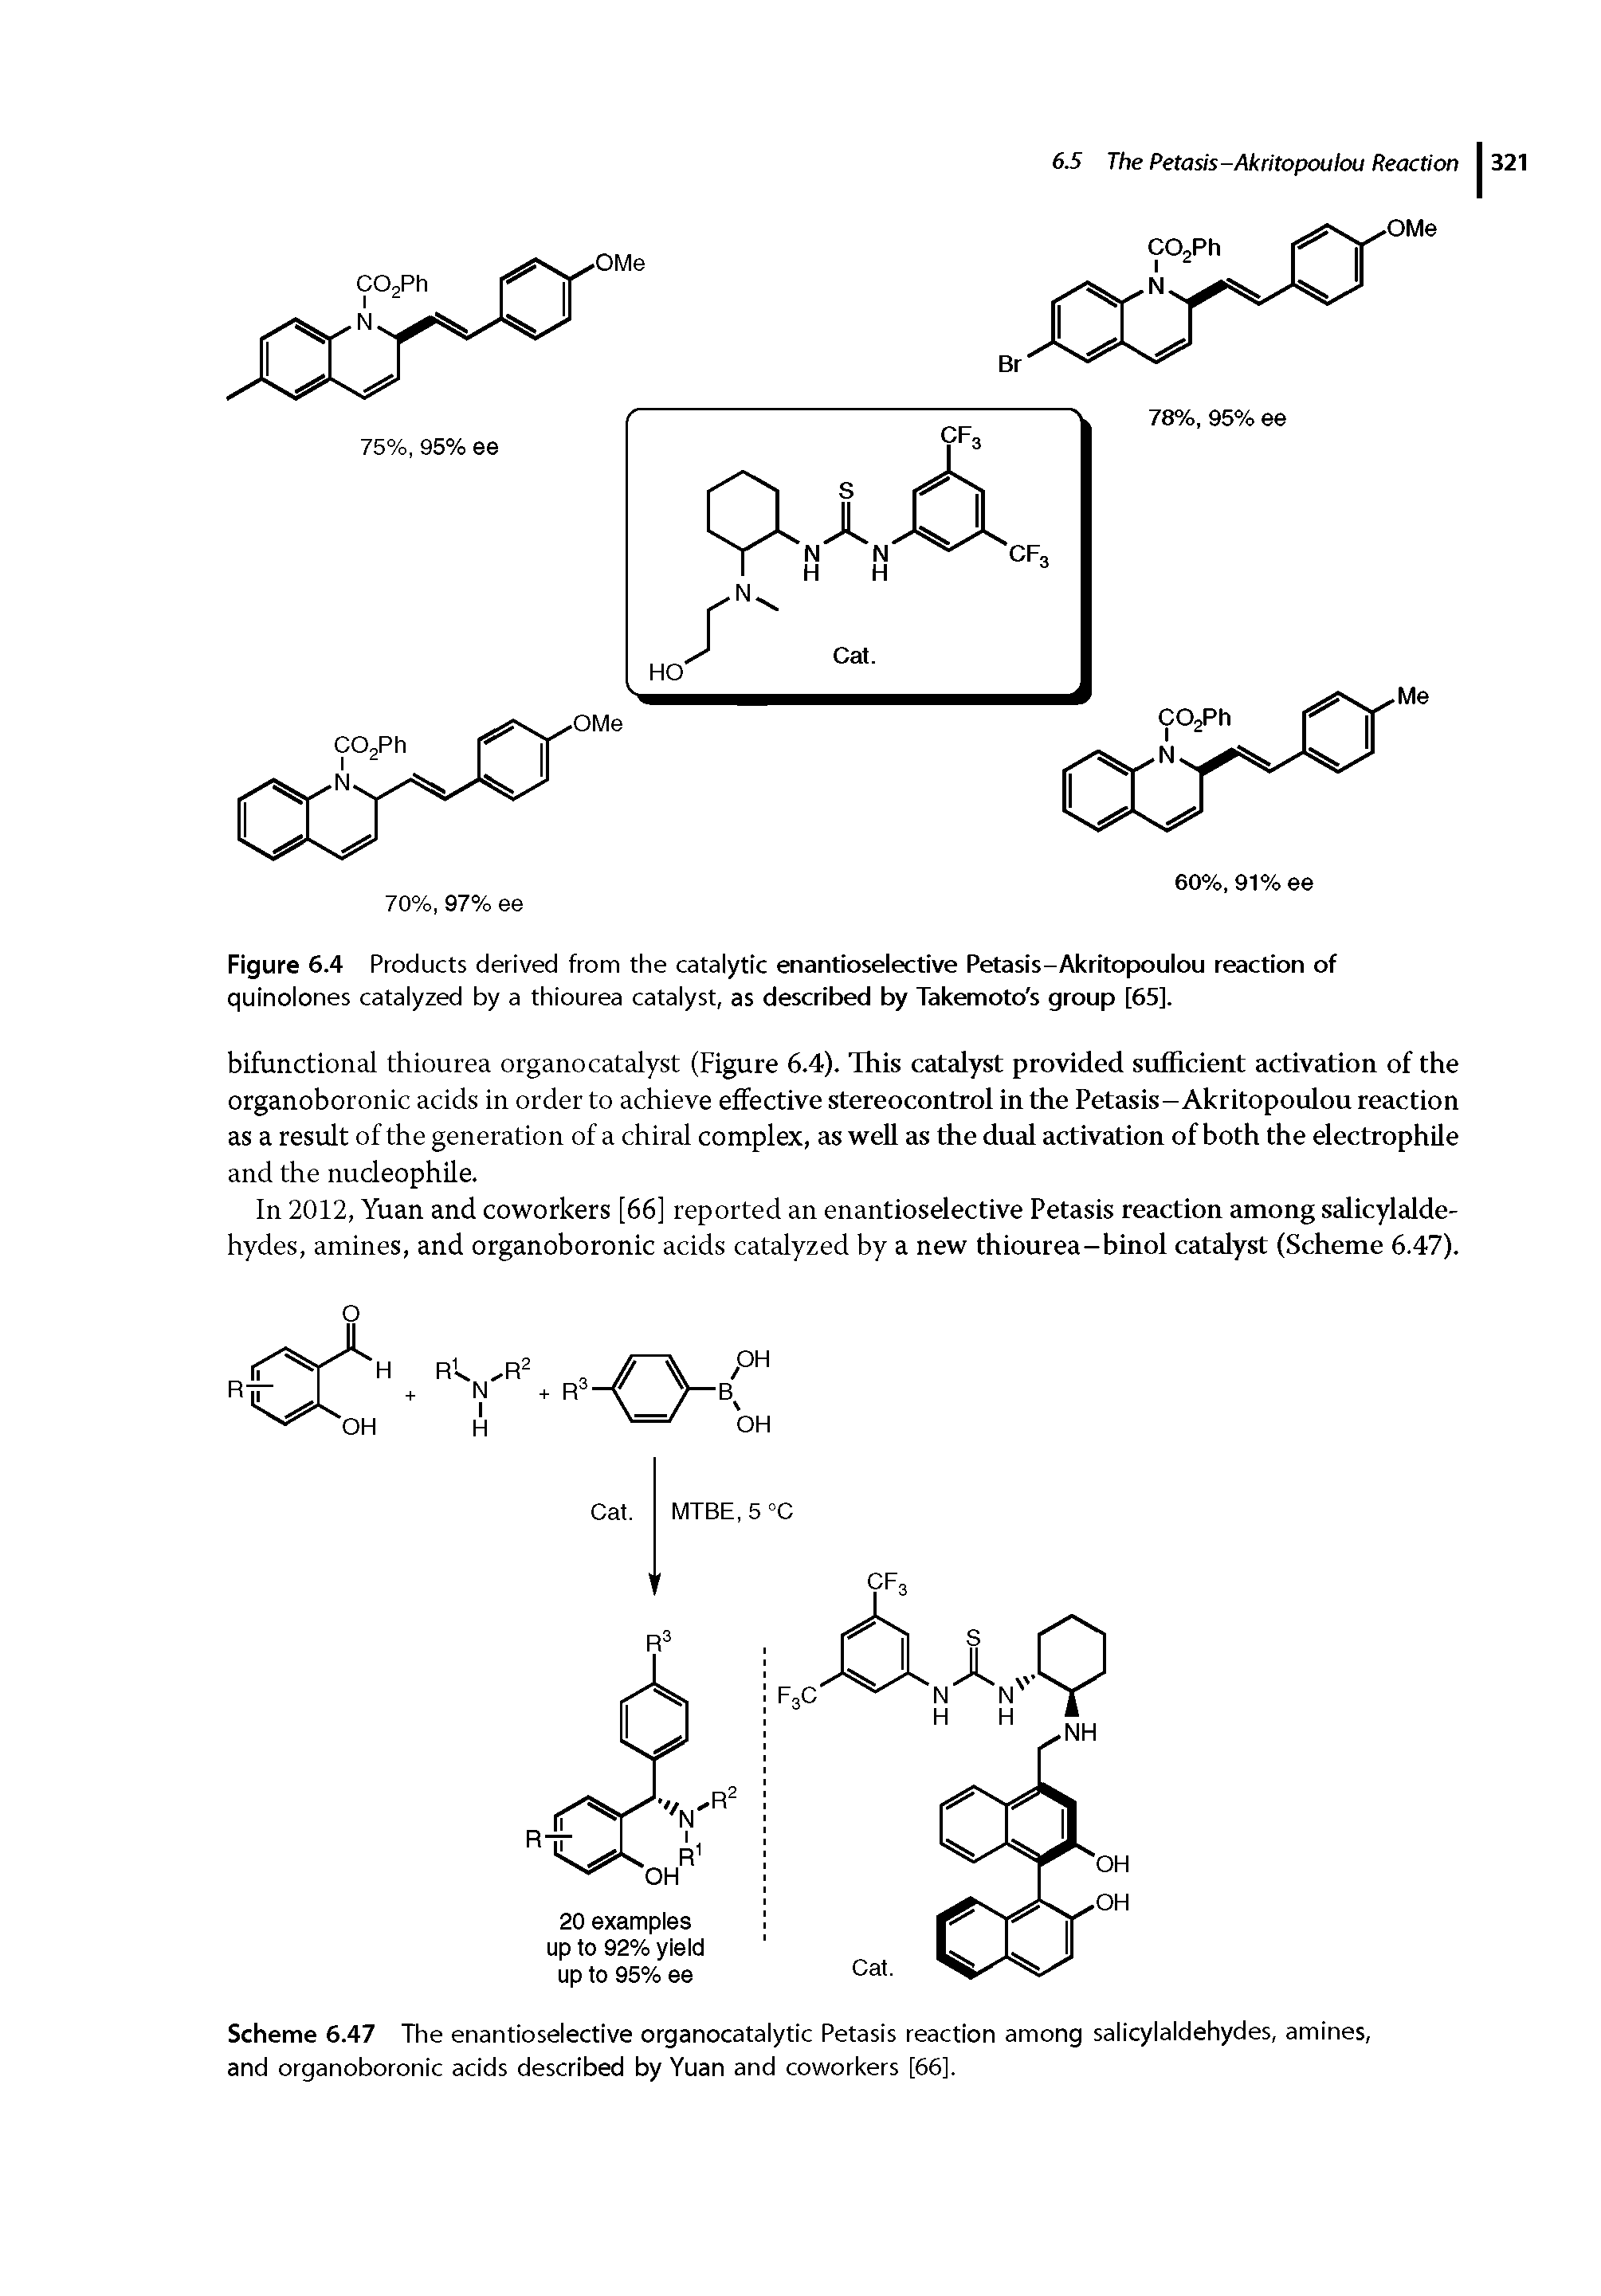 Scheme 6.47 The enantioselective organocatalytic Petasis reaction among salicylaldehydes, amines, and organoboronic acids described by Yuan and coworkers [66].